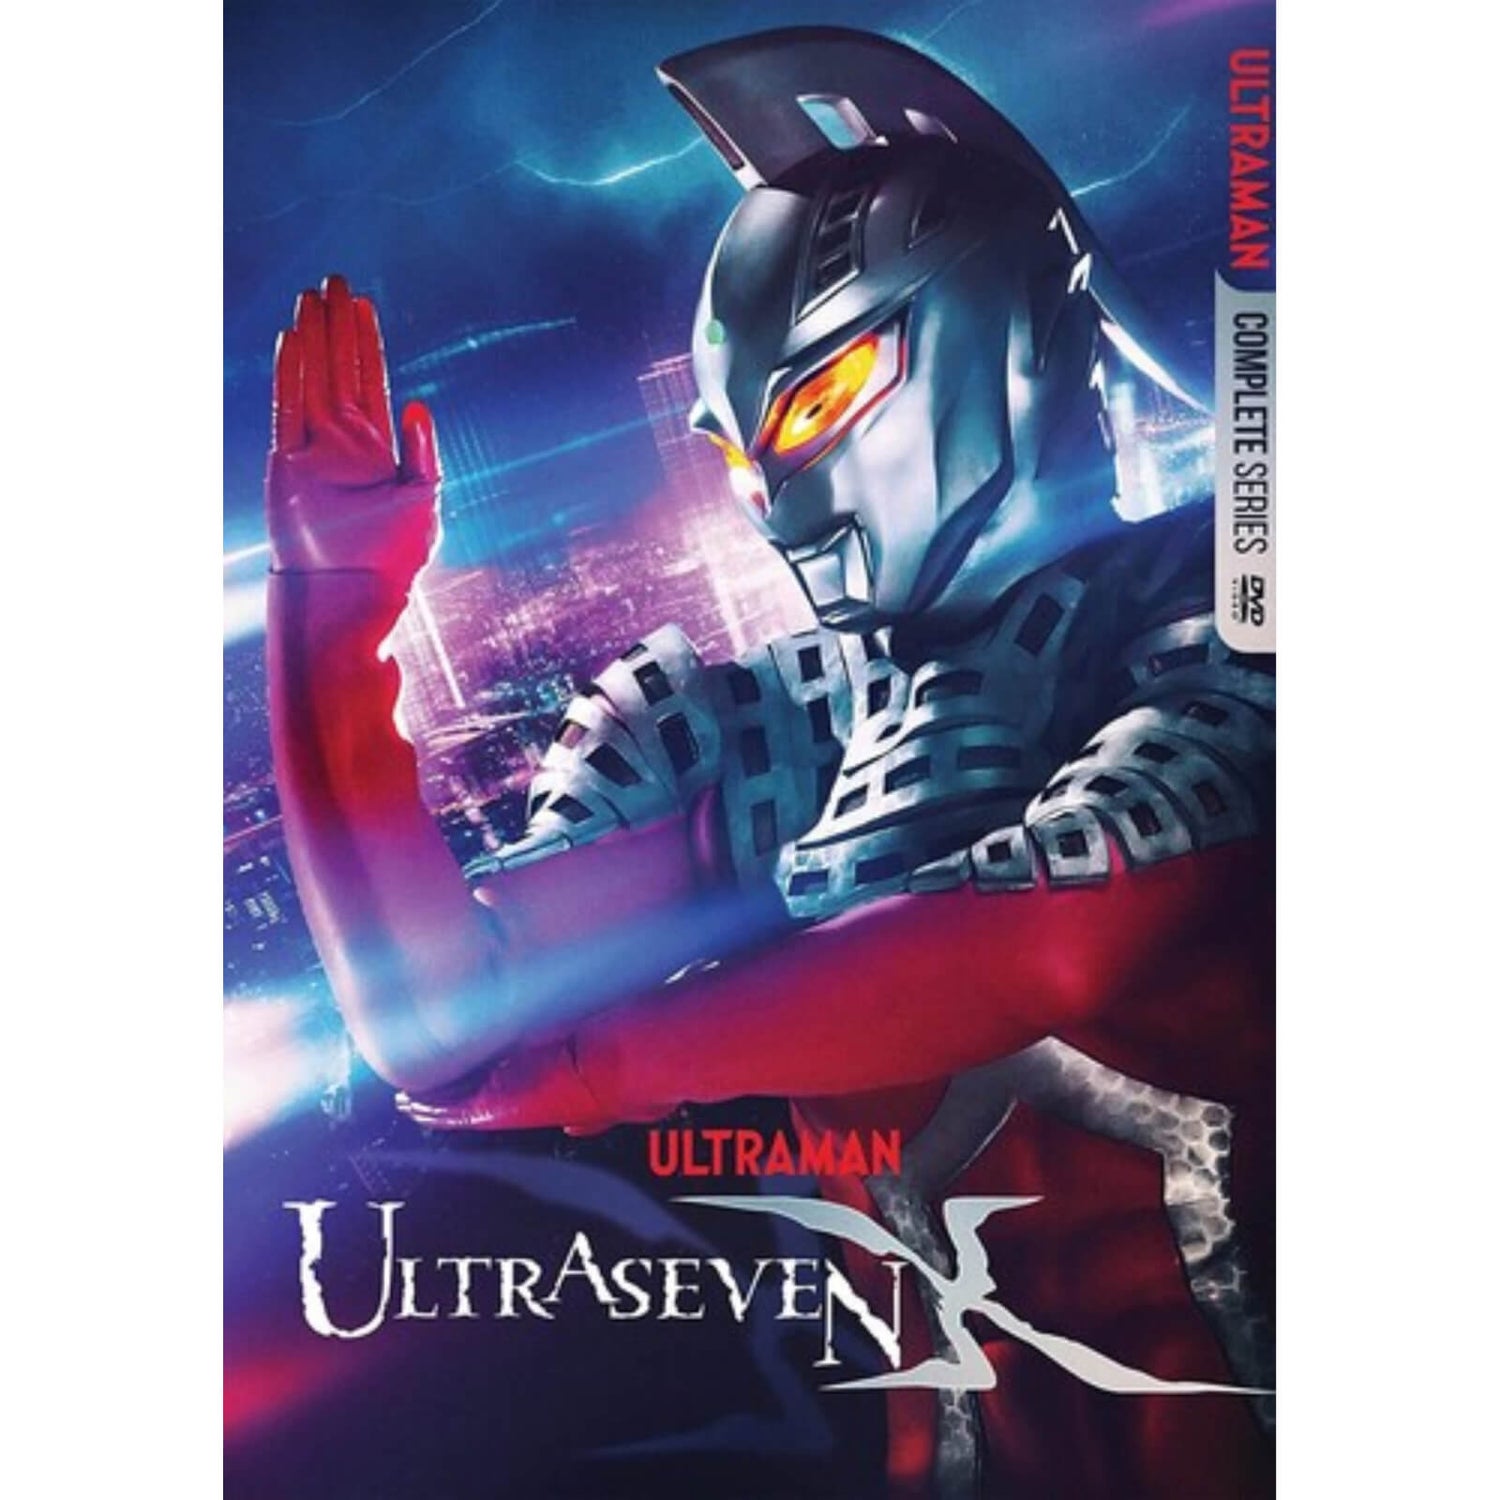 Ultraseven X Complete Series (US Import)